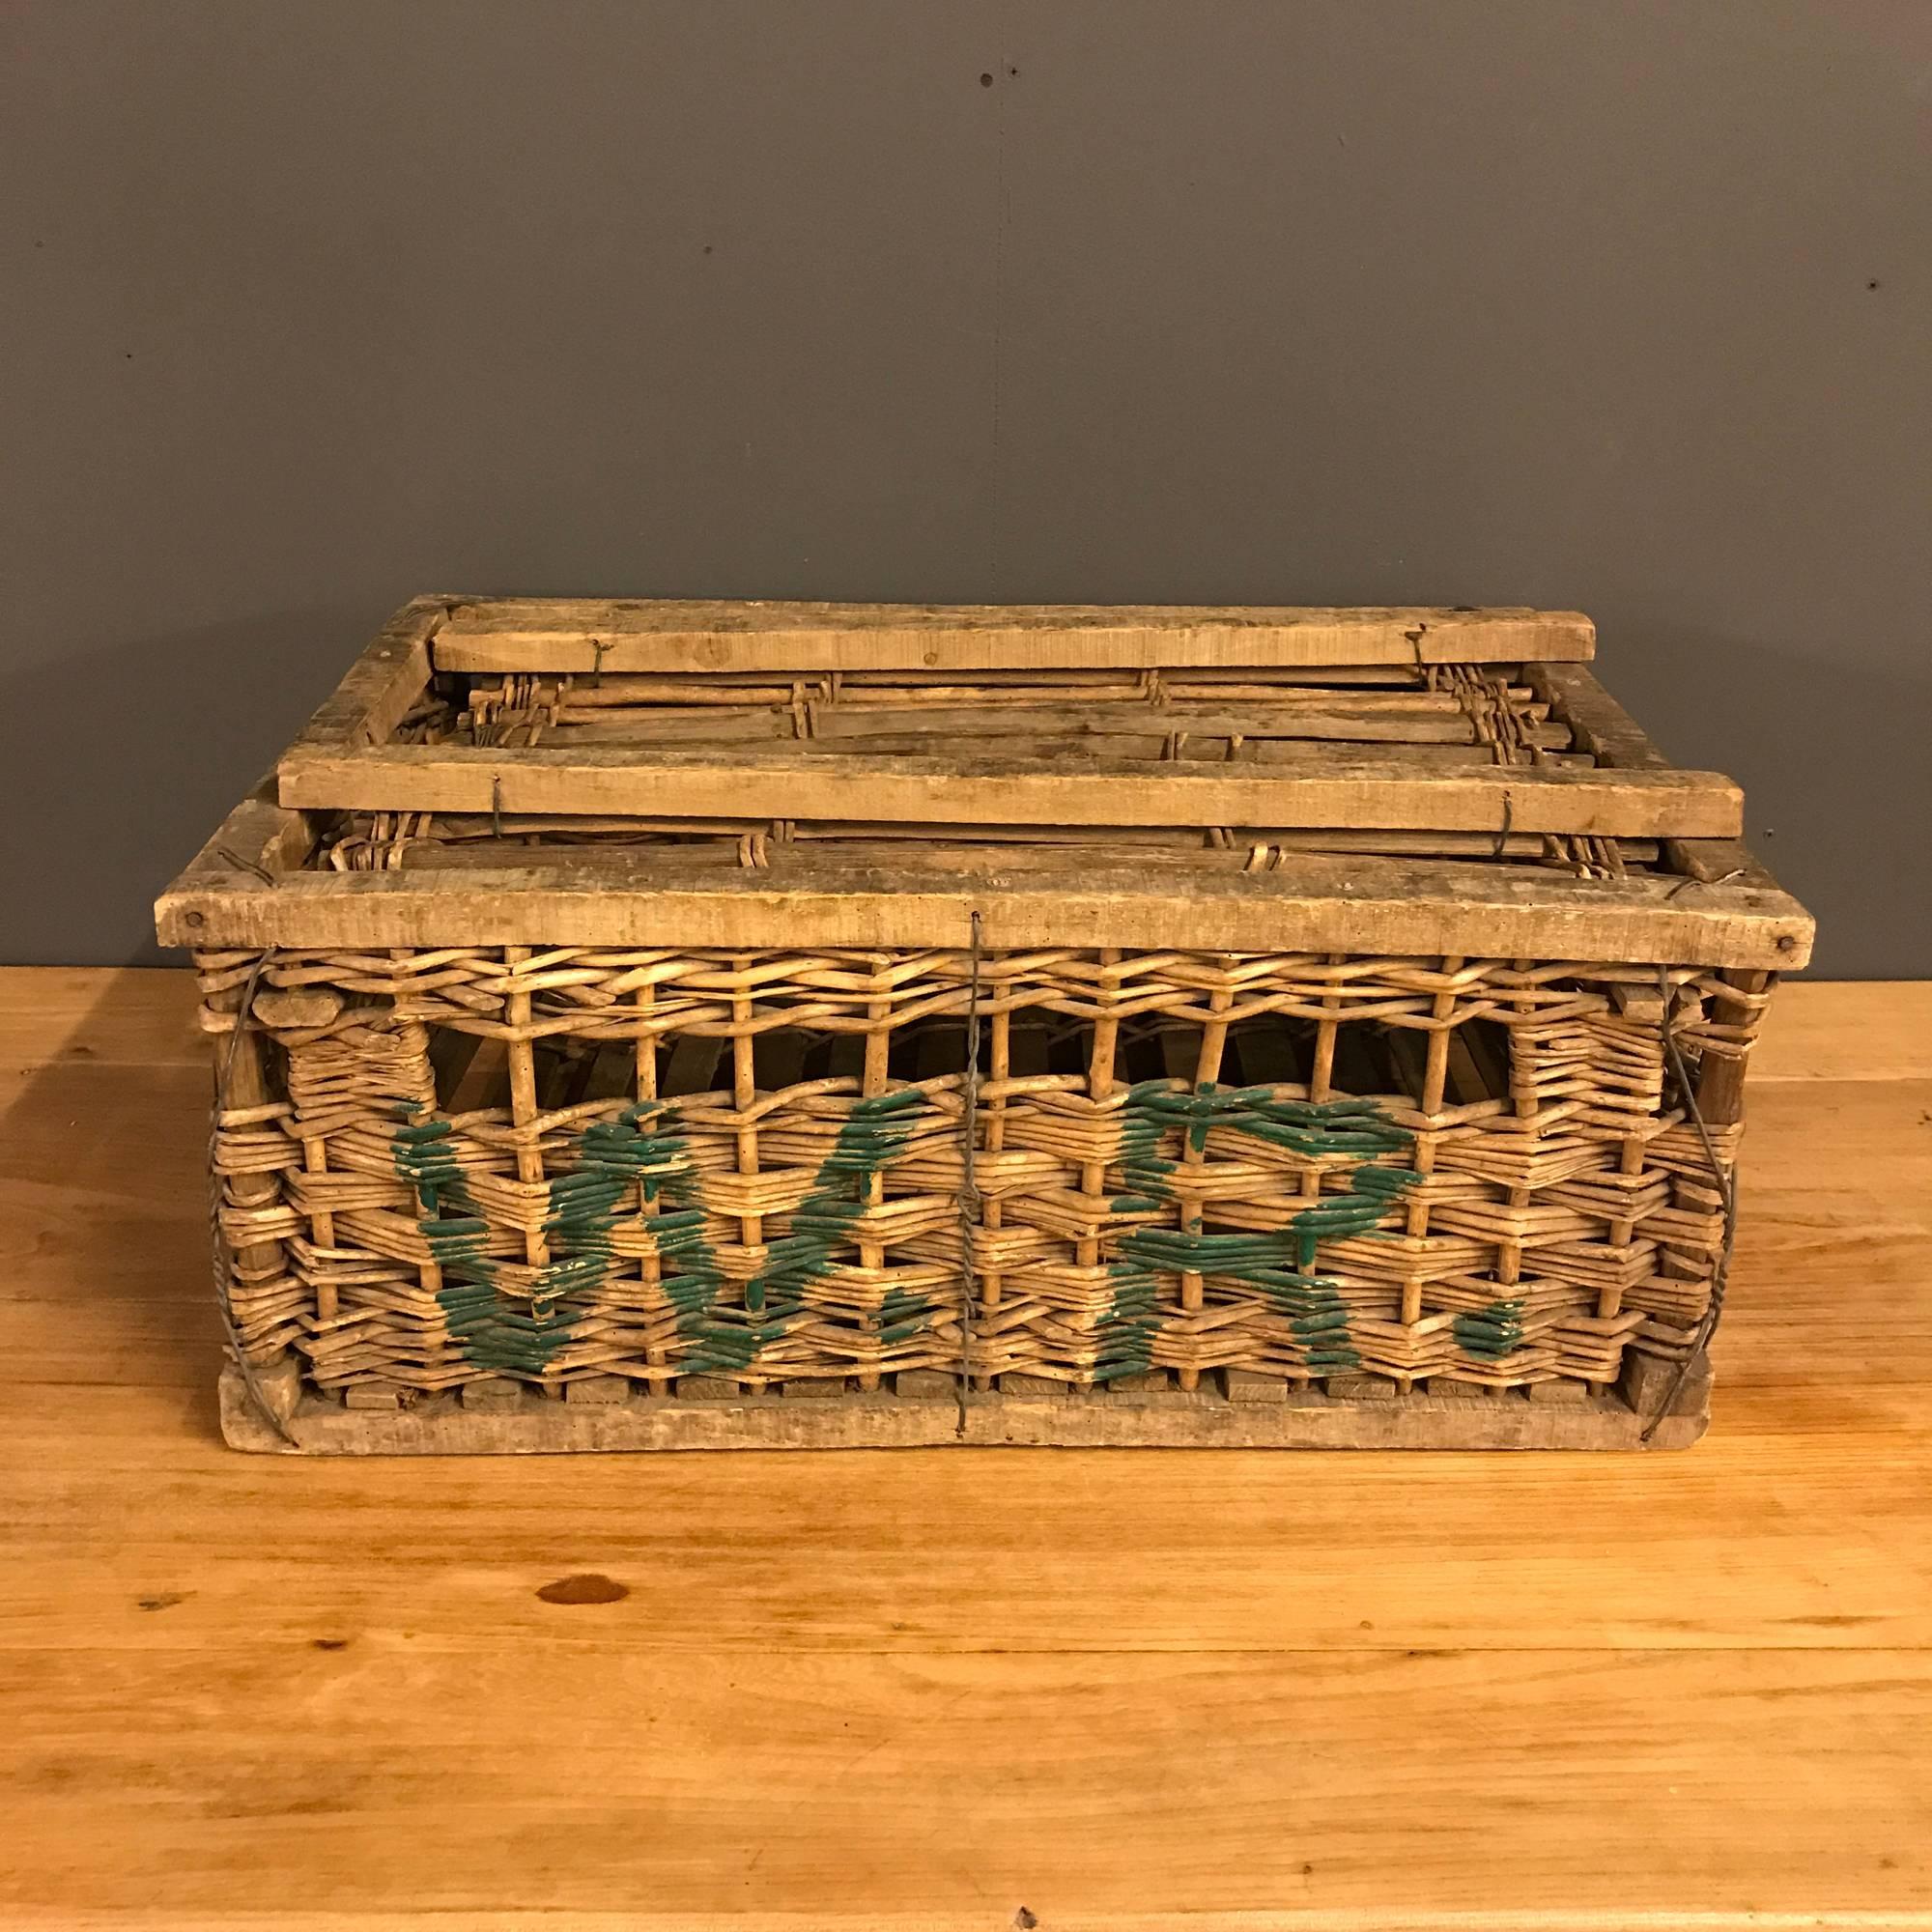 Nice vintage rattan storage basket. Made in France during the 1960s. The basket has W.R. written on it. With signs of use this basket remains in good condition.